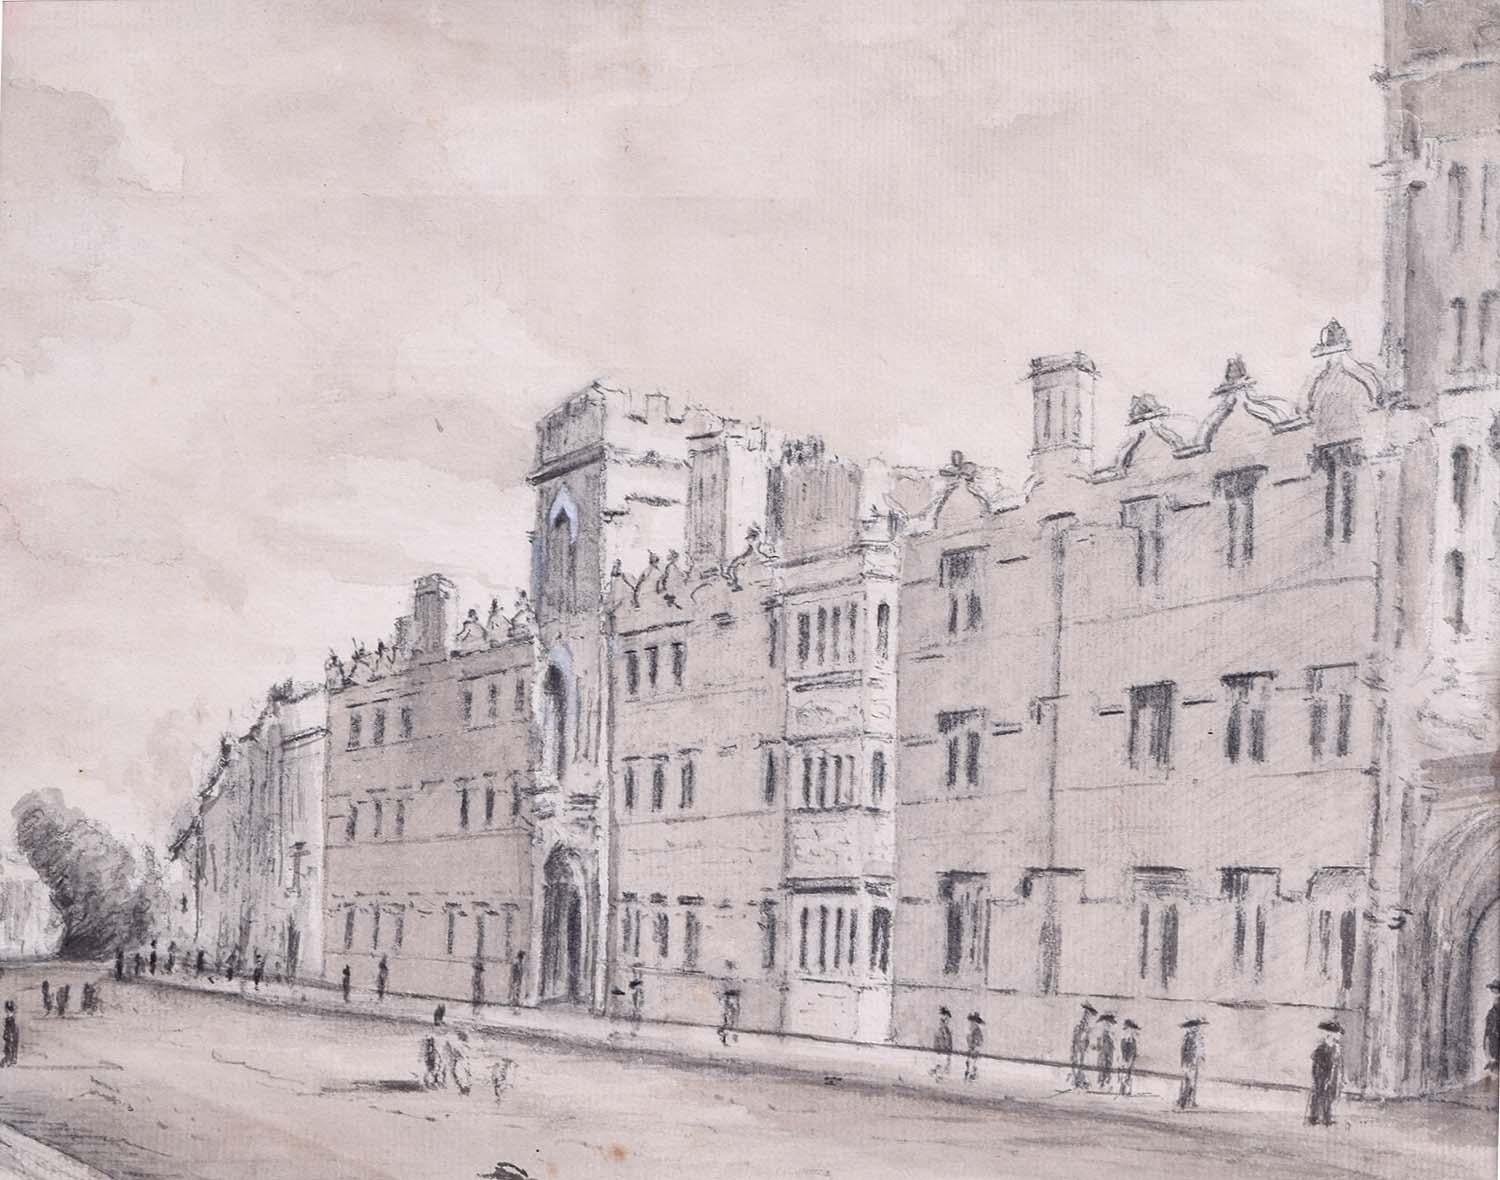 Unknown Landscape Art - Oxford High Street Oxford High Street c. 1840  Pencil & wash on paper